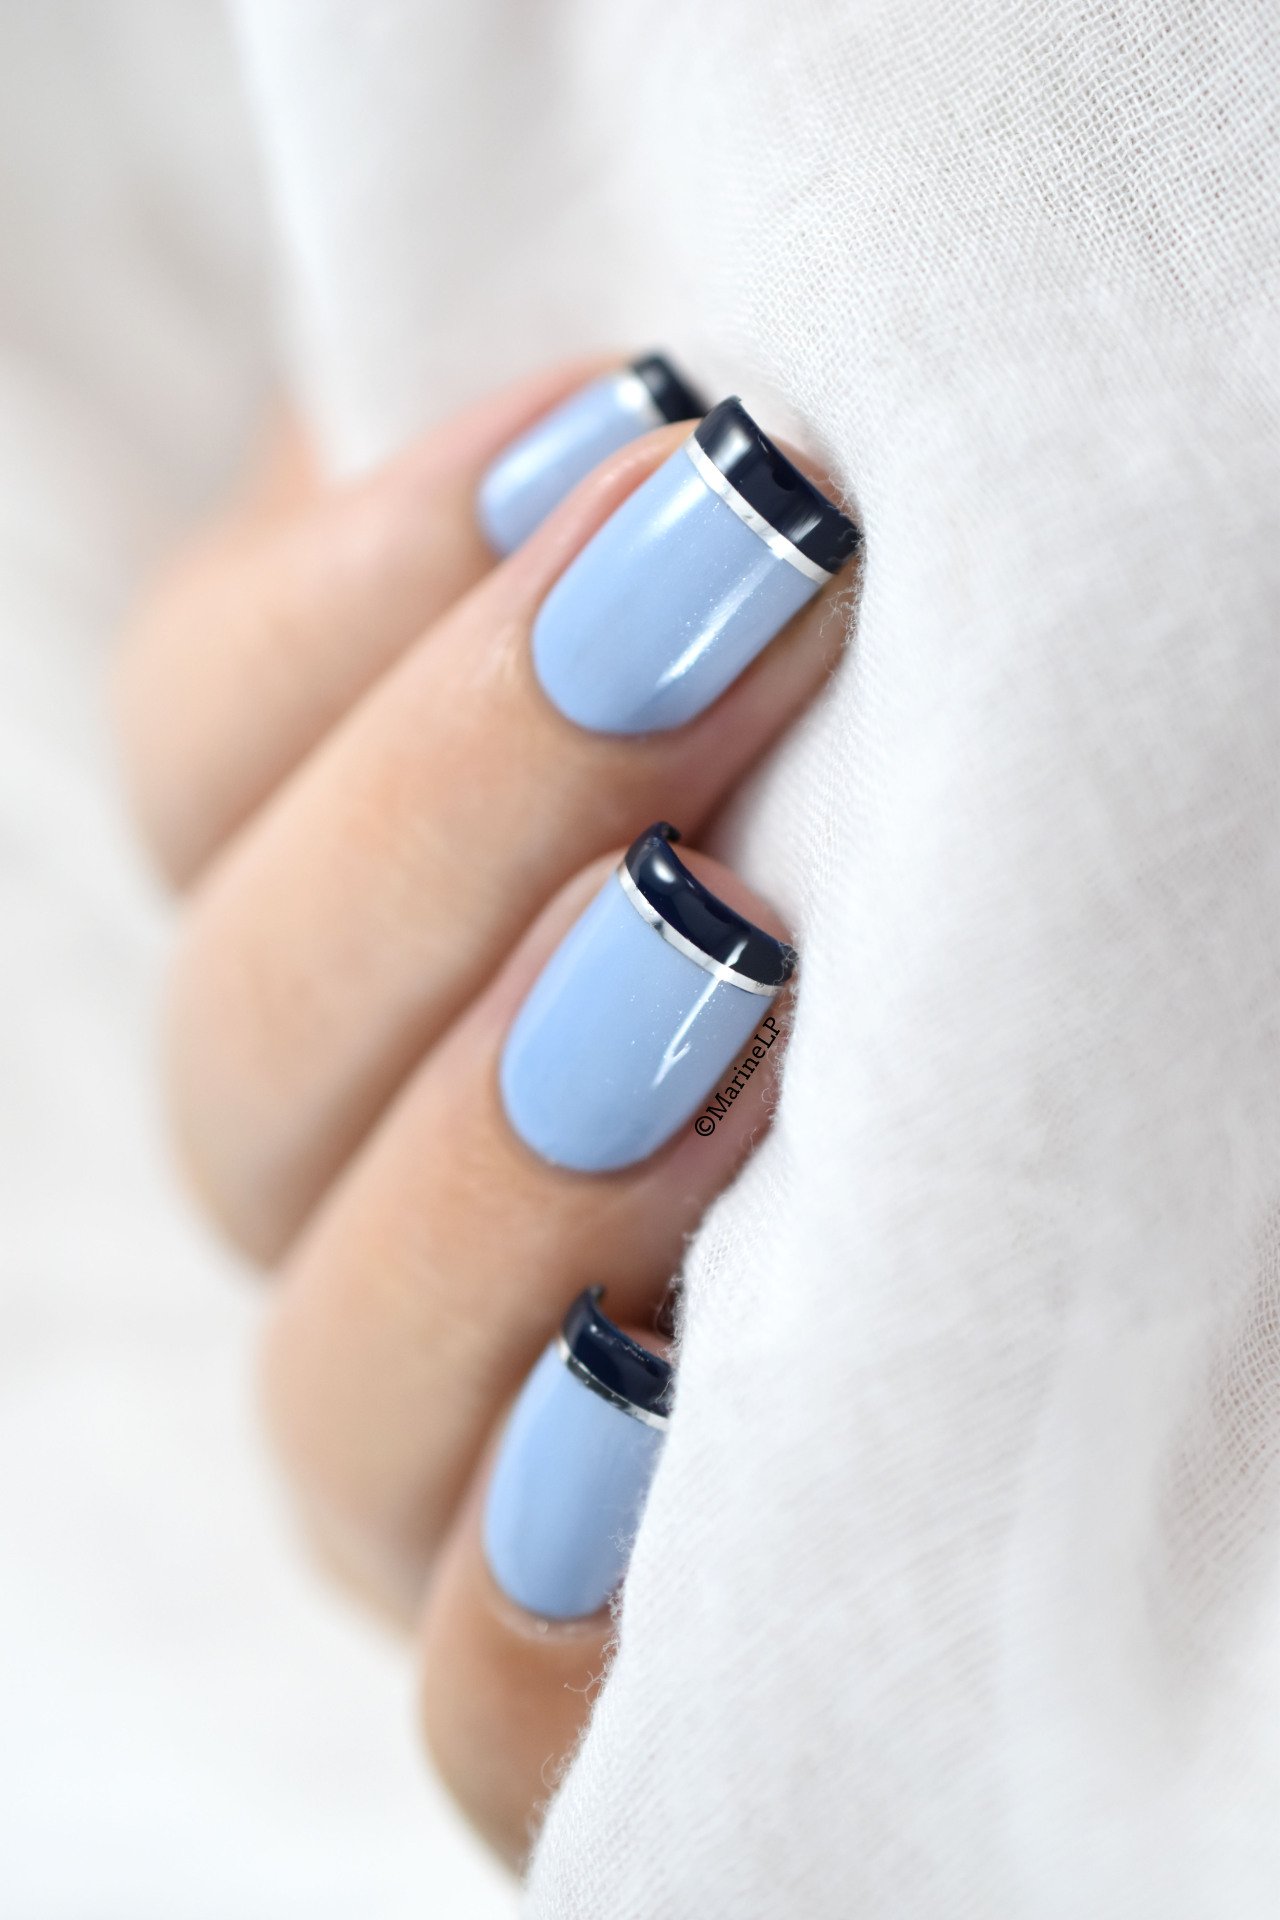 26 French Manicure Designs Perfect For Any Occasion